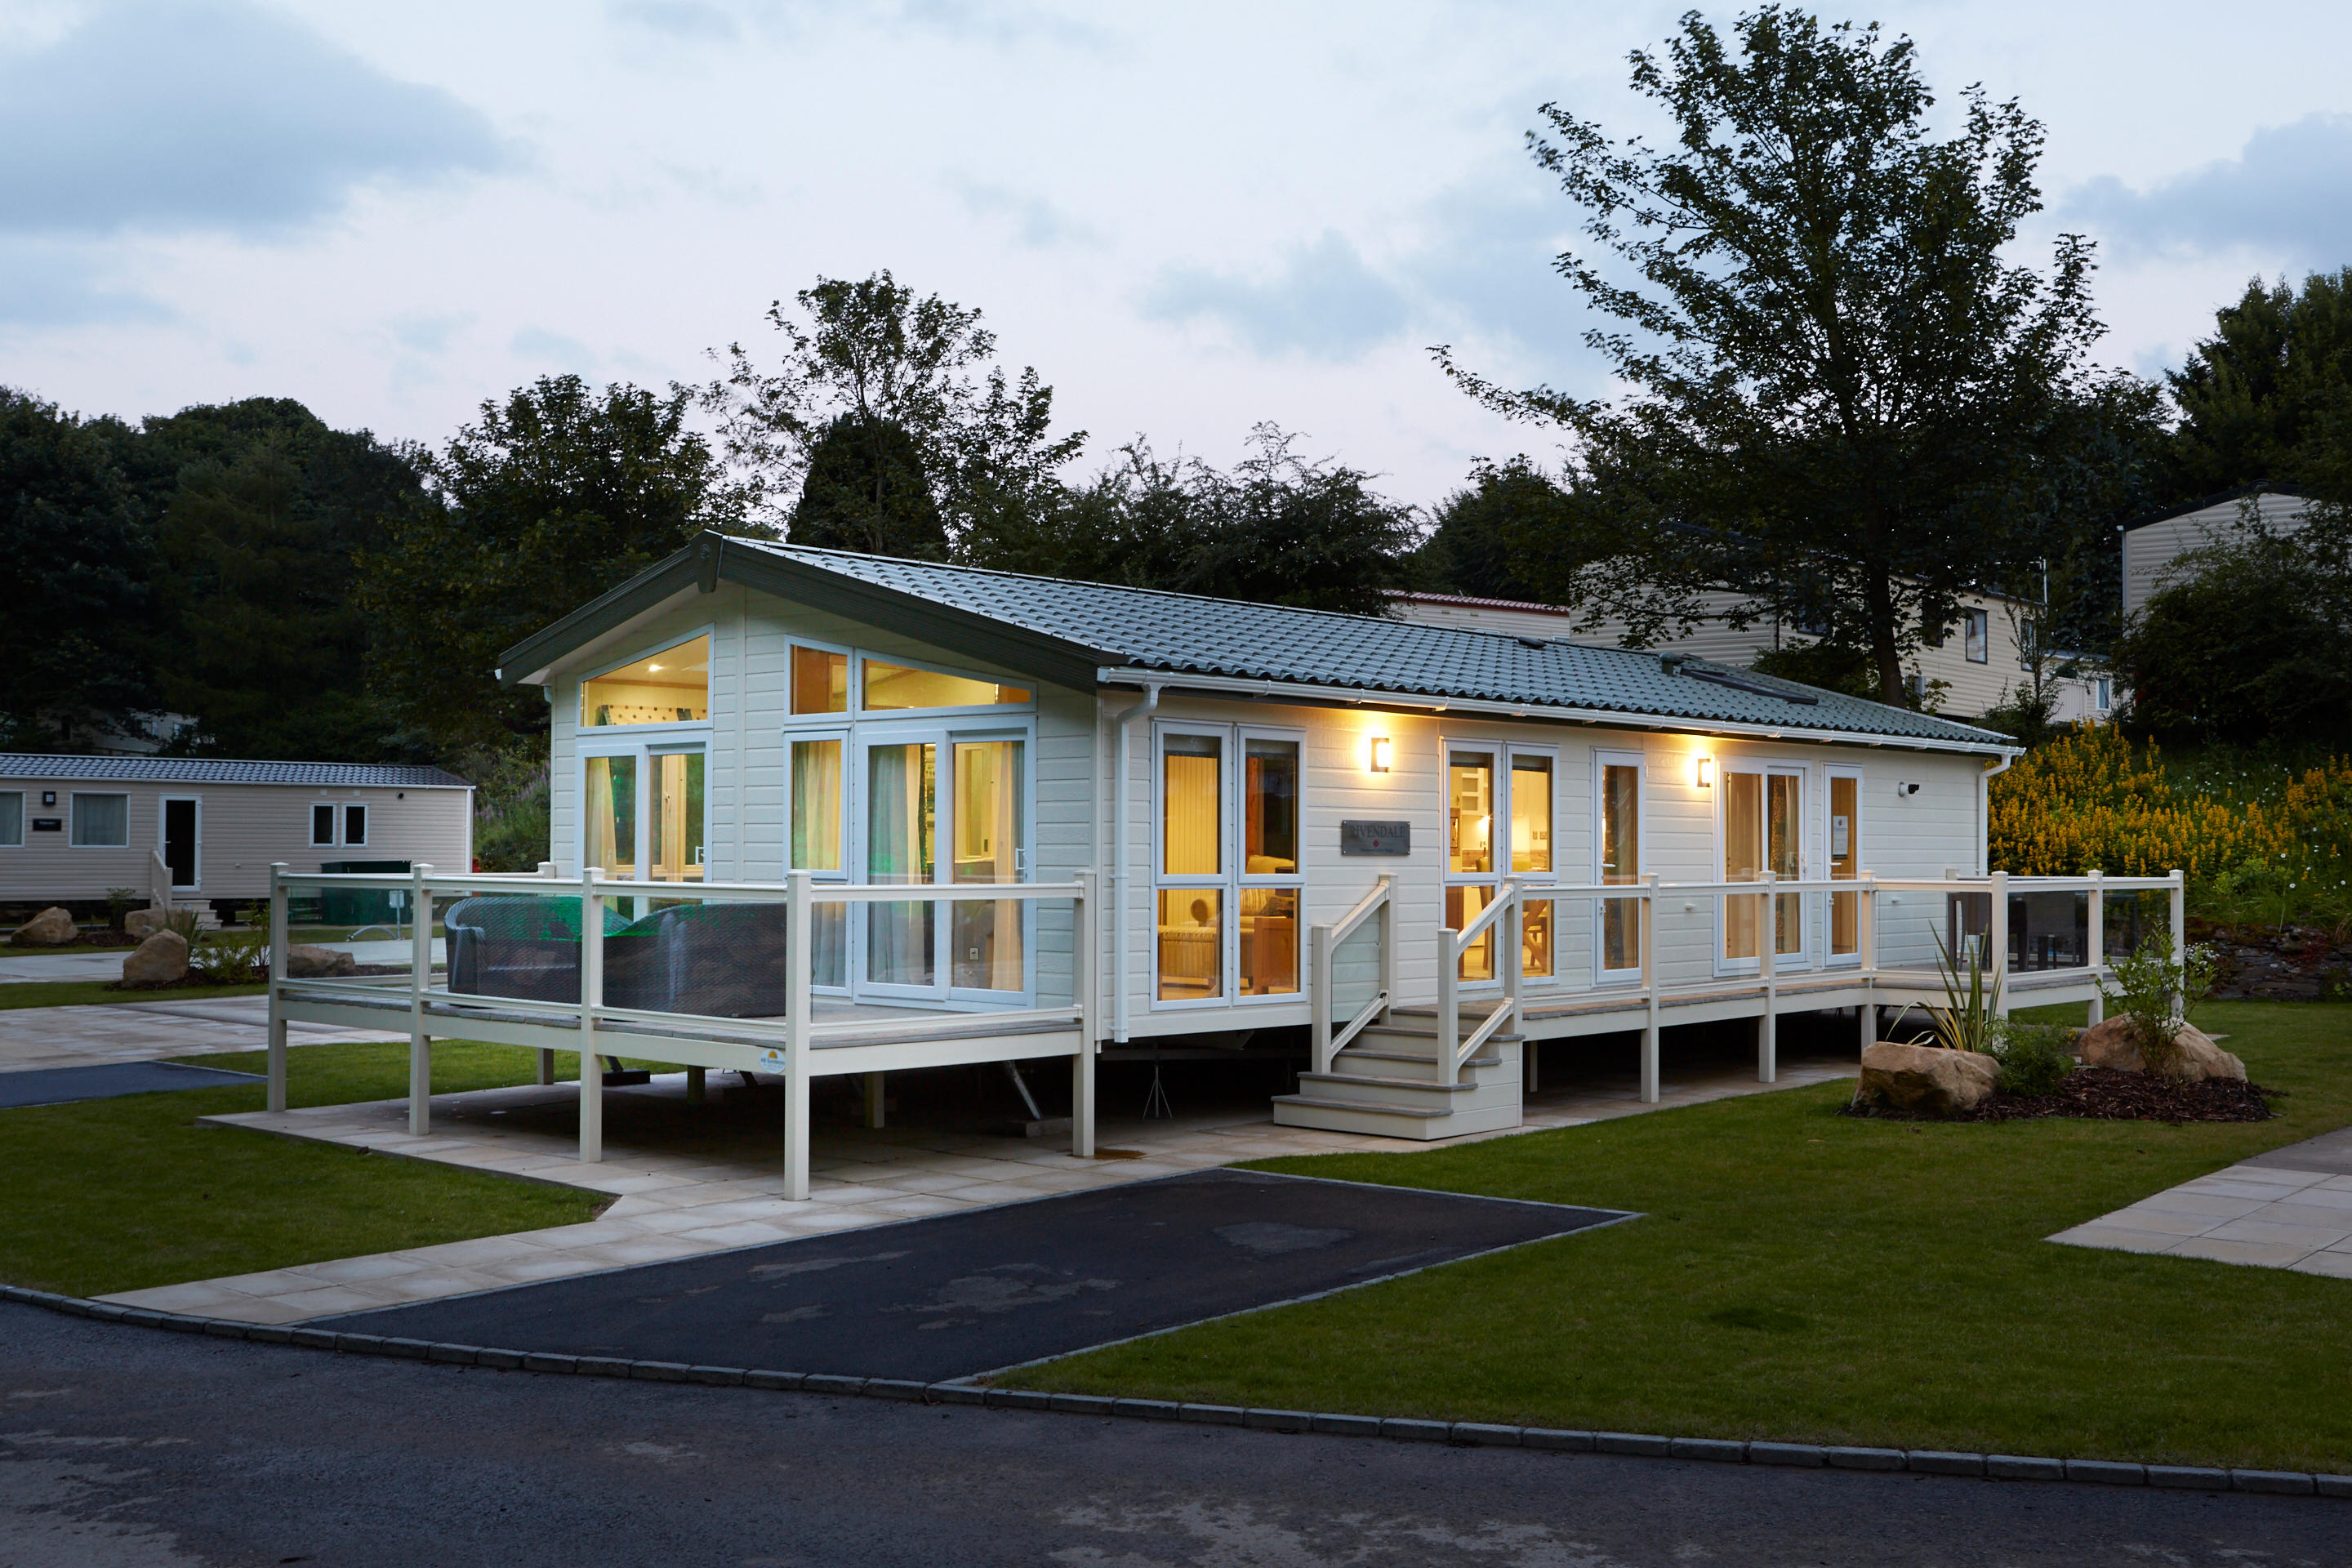 Images Yorkshire Dales - Holiday Park & Holiday Homes - Park Leisure